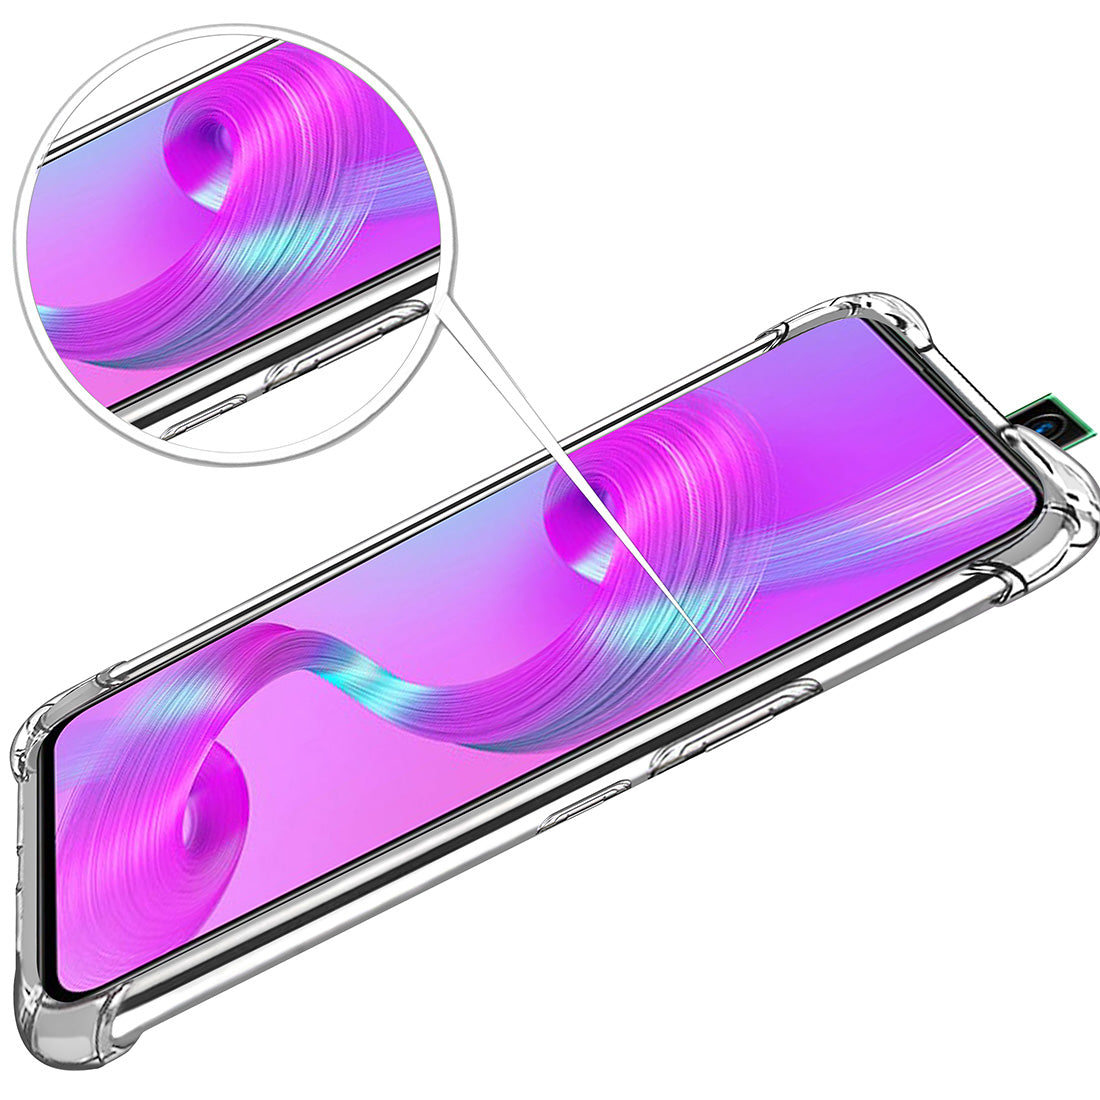 Hybrid Clear Case for Infinix S5 Pro